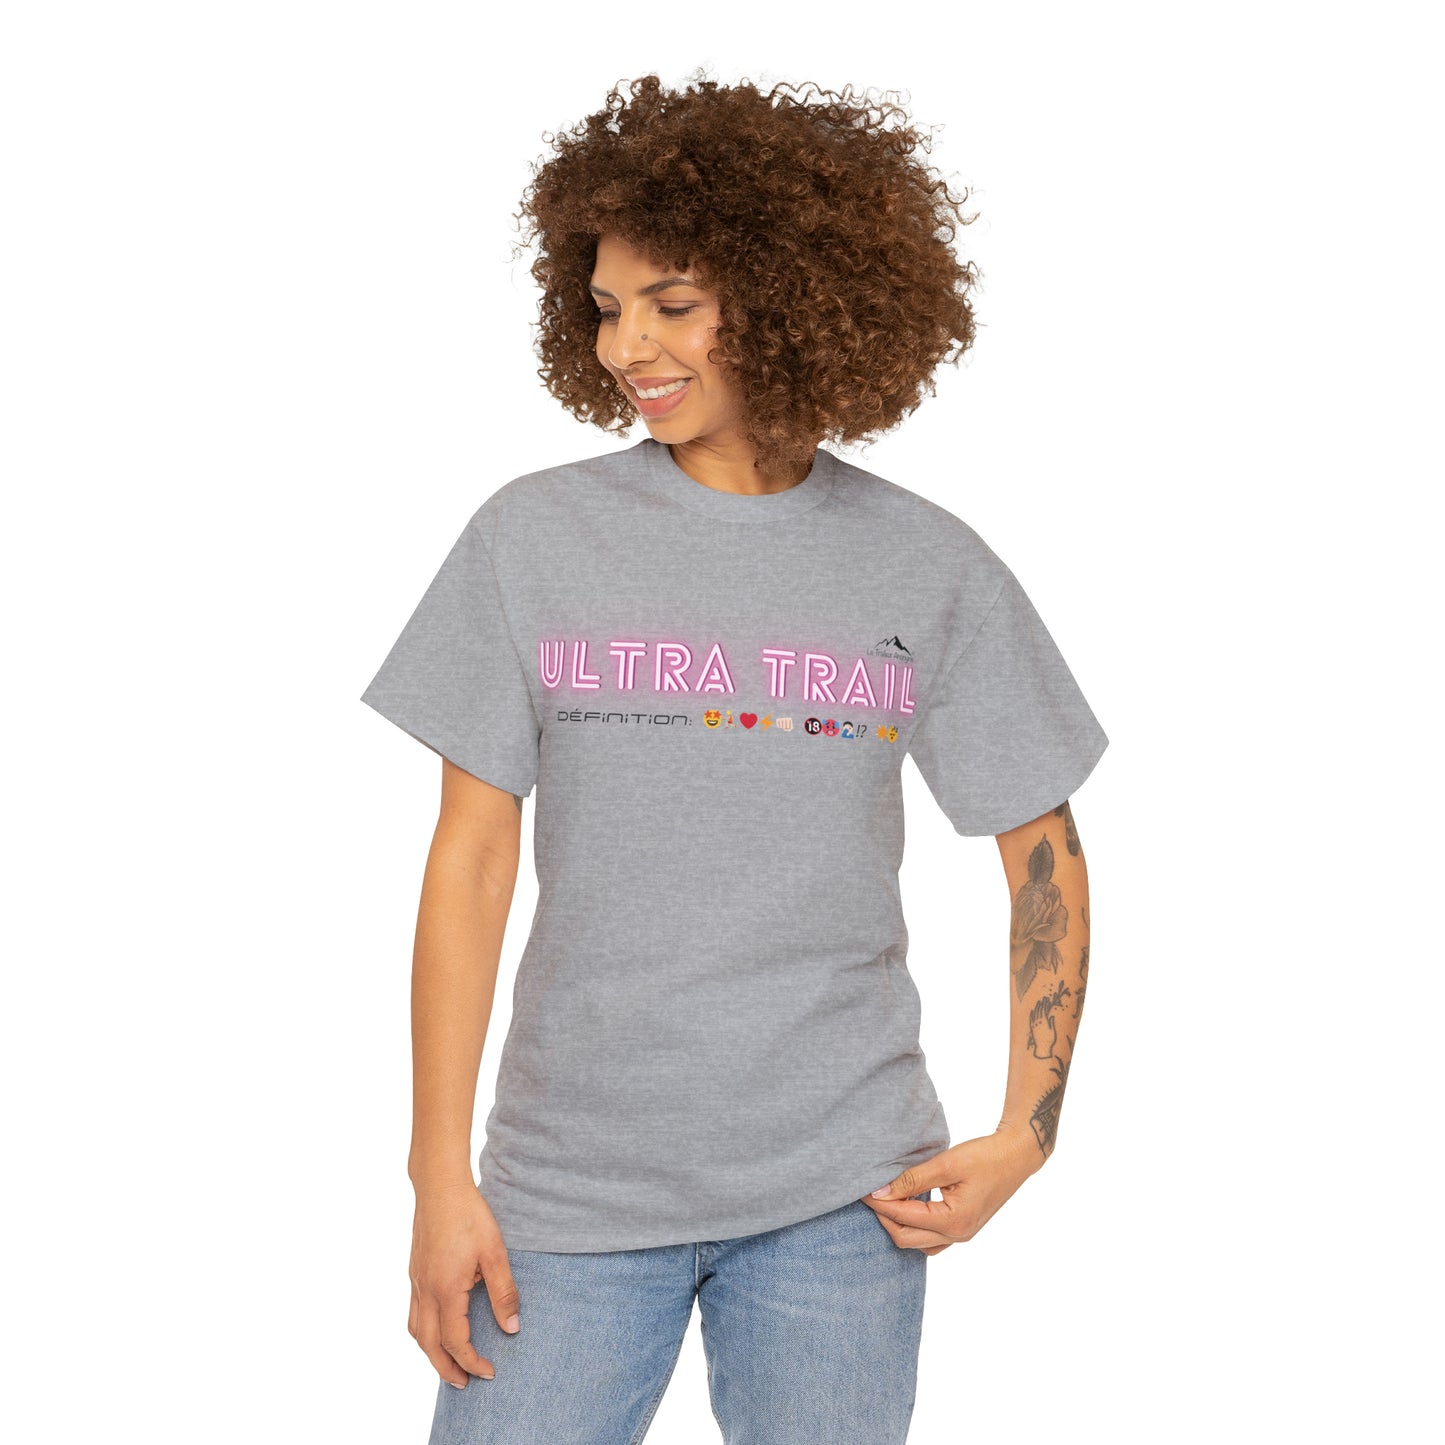 Basic T-Shirt - Women - "Definition" Collection (1430)